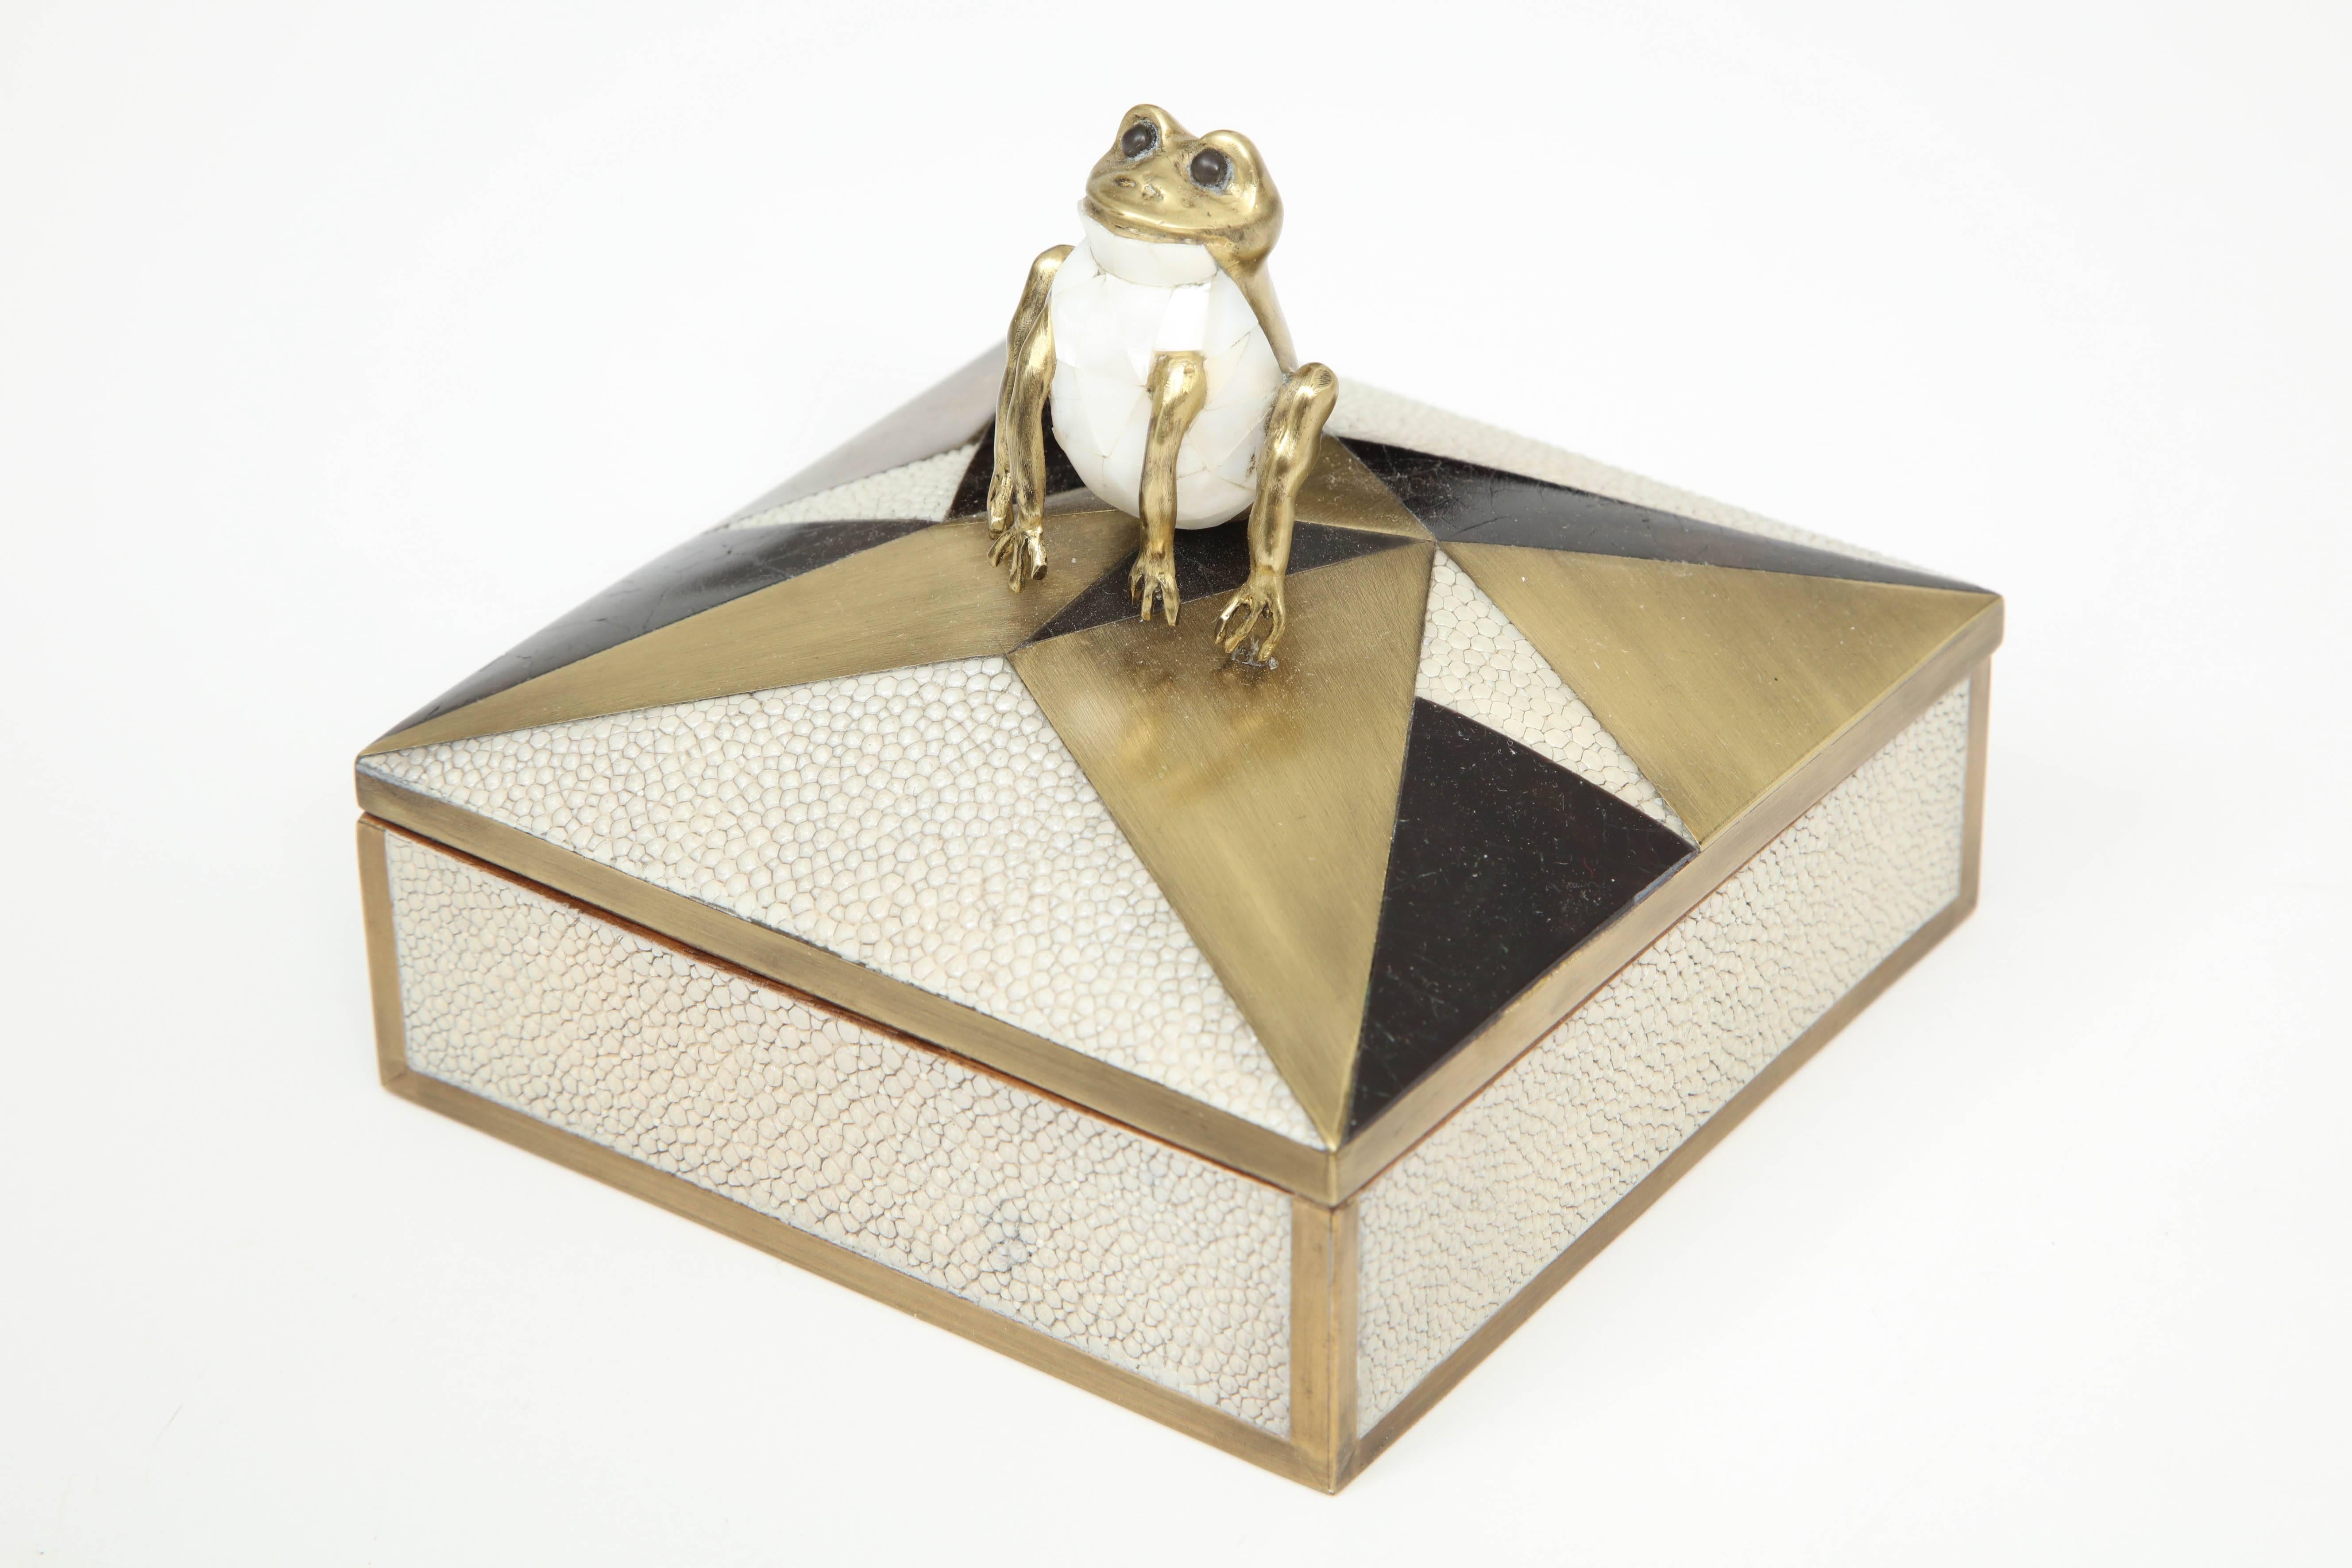 Decorative box with a beautiful frog made of mother-of-pearl.
The box is made of shagreen, palm wood and bronze details.